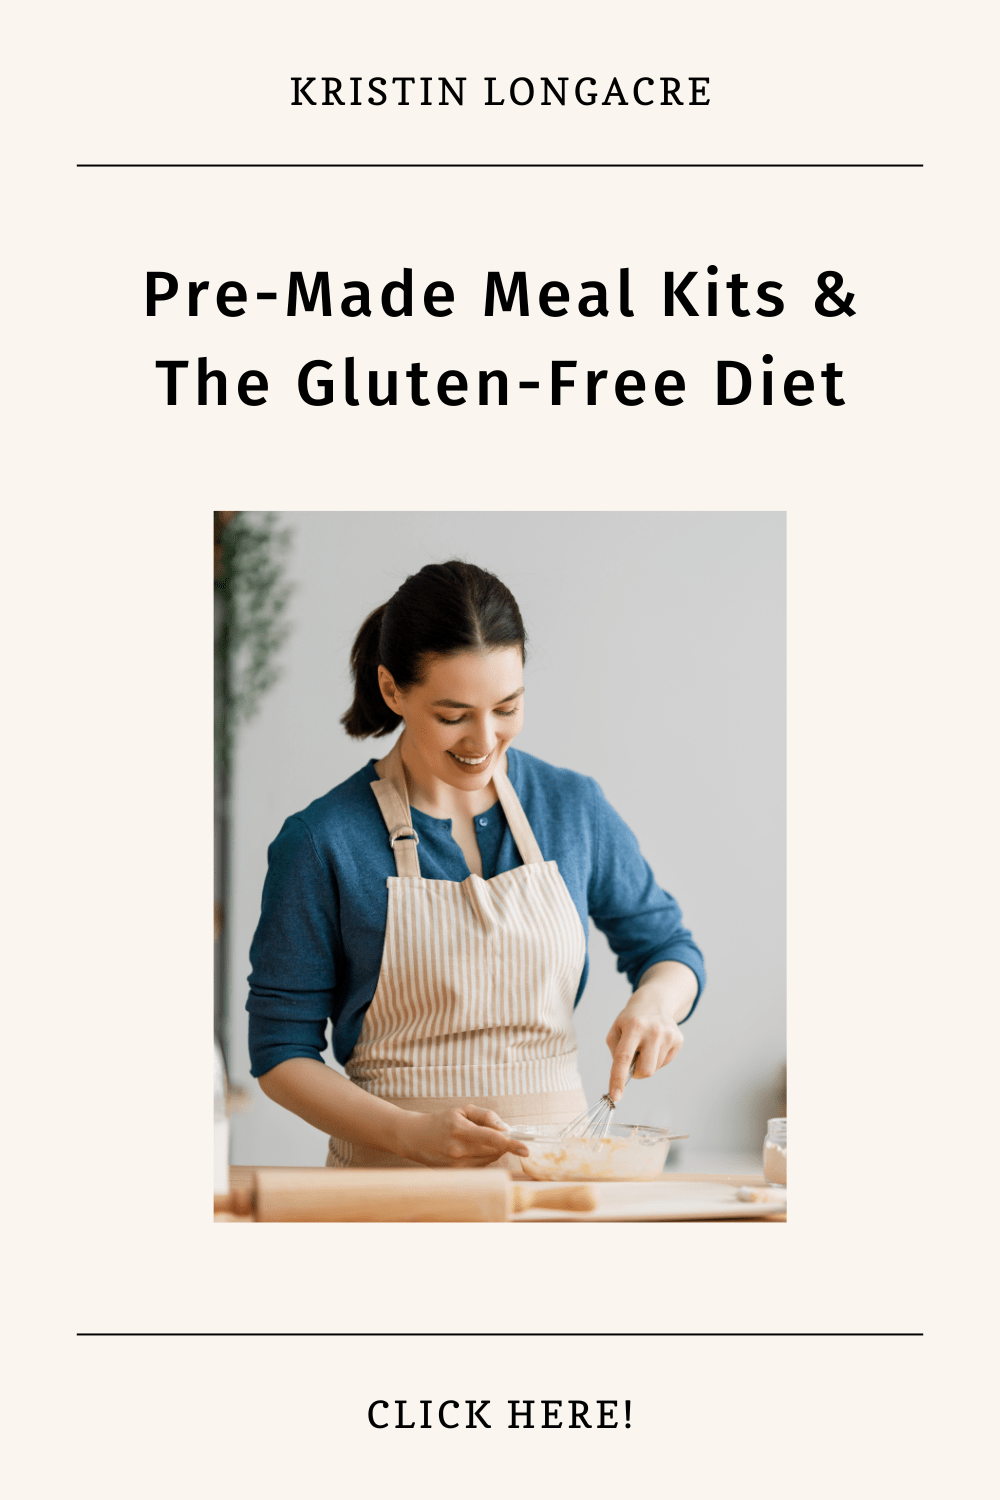 Pre-Made Meal Kits & The Gluten-Free Diet